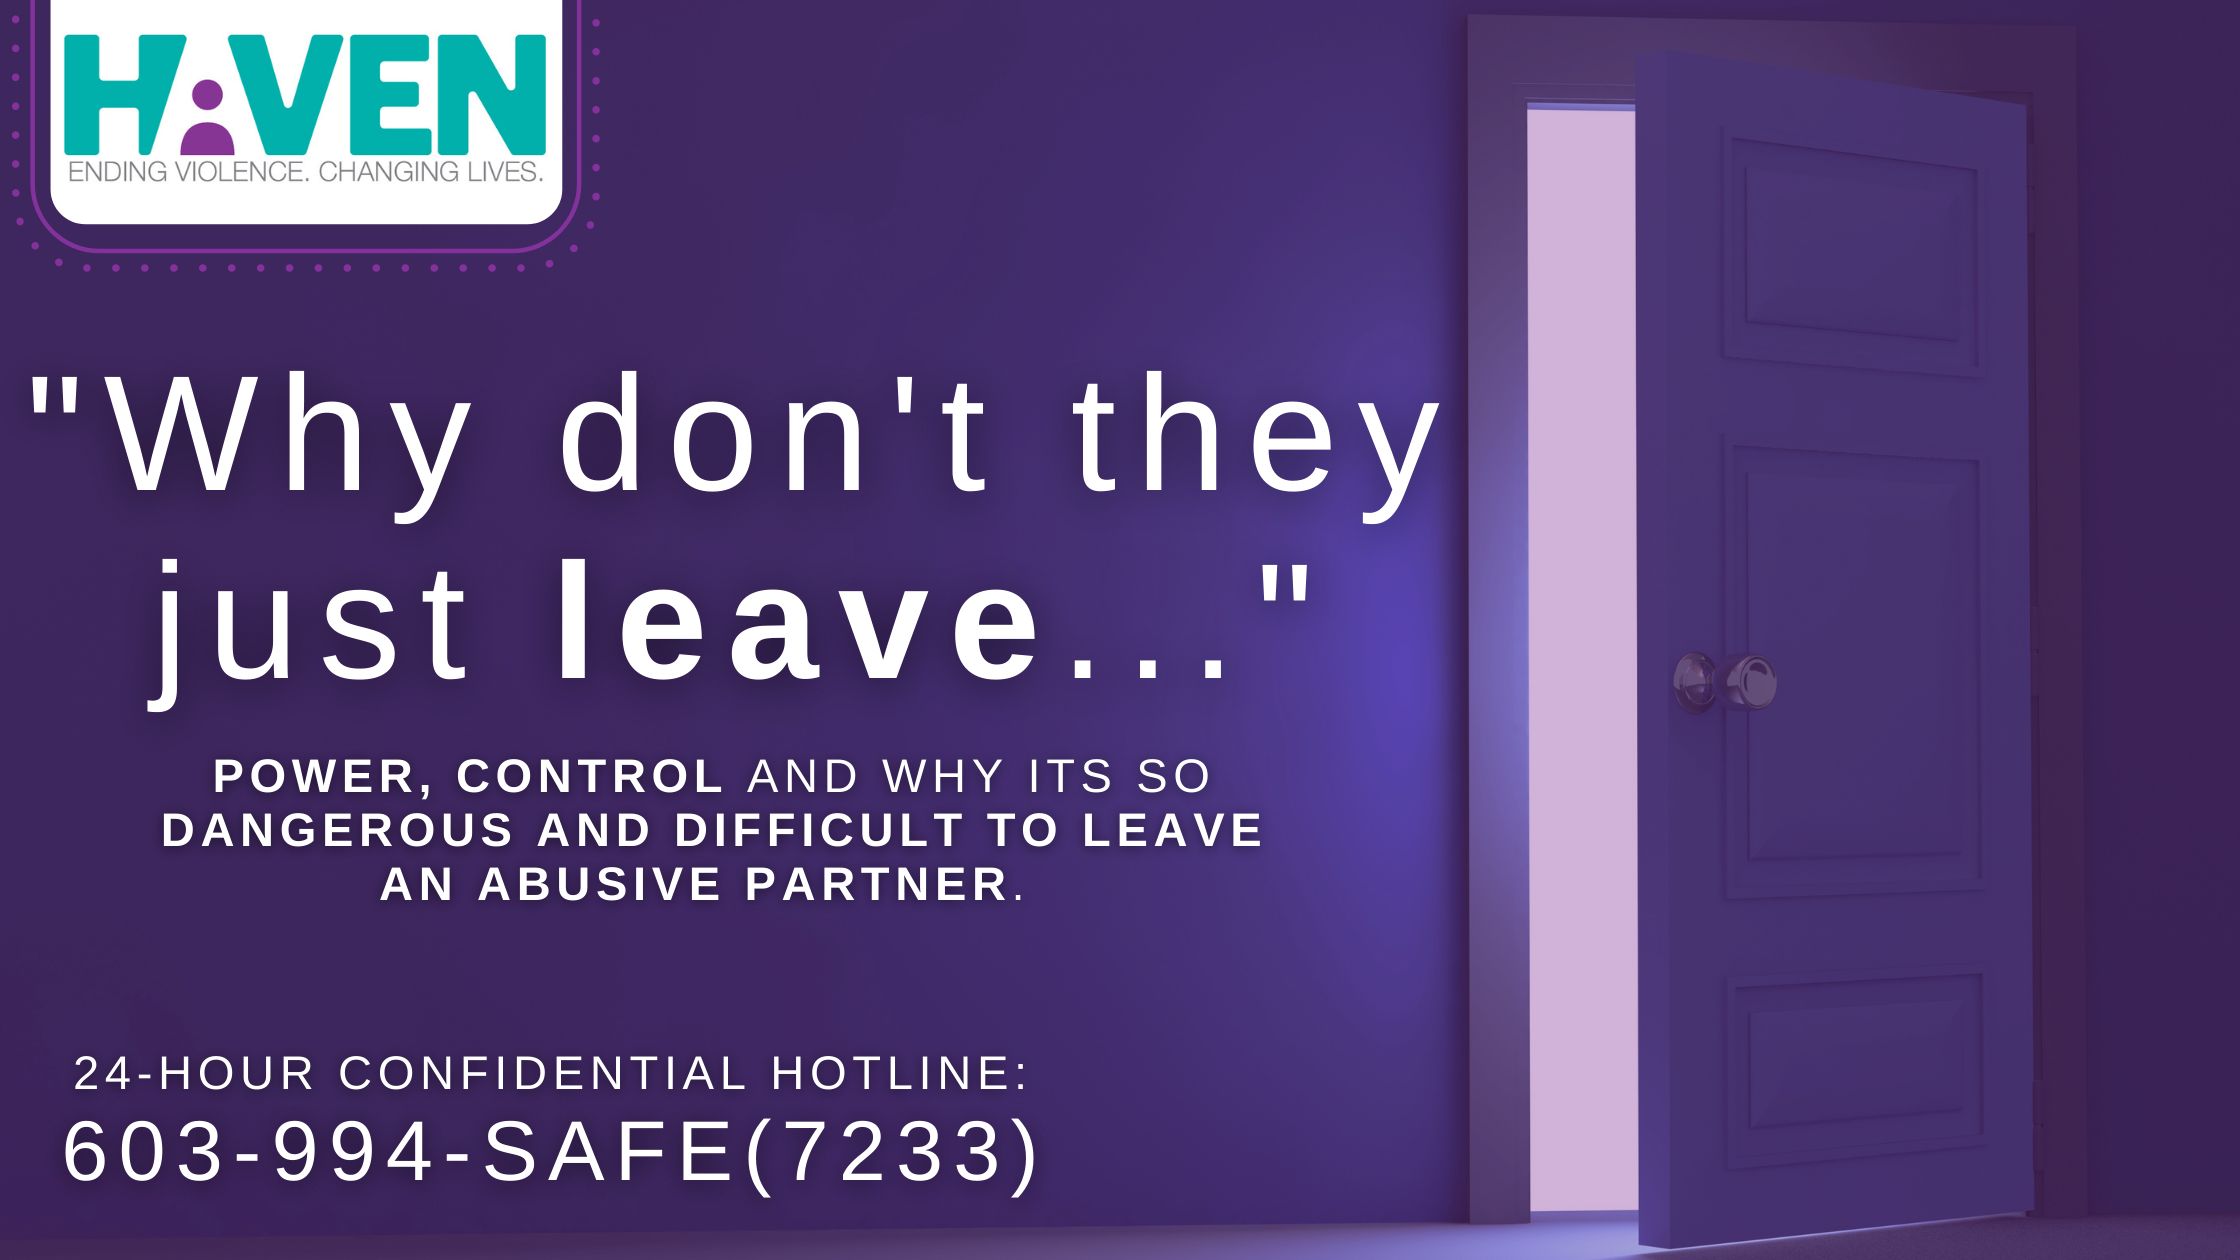 DVAM 2020 Blog Post: “Why Don’t They Just Leave”